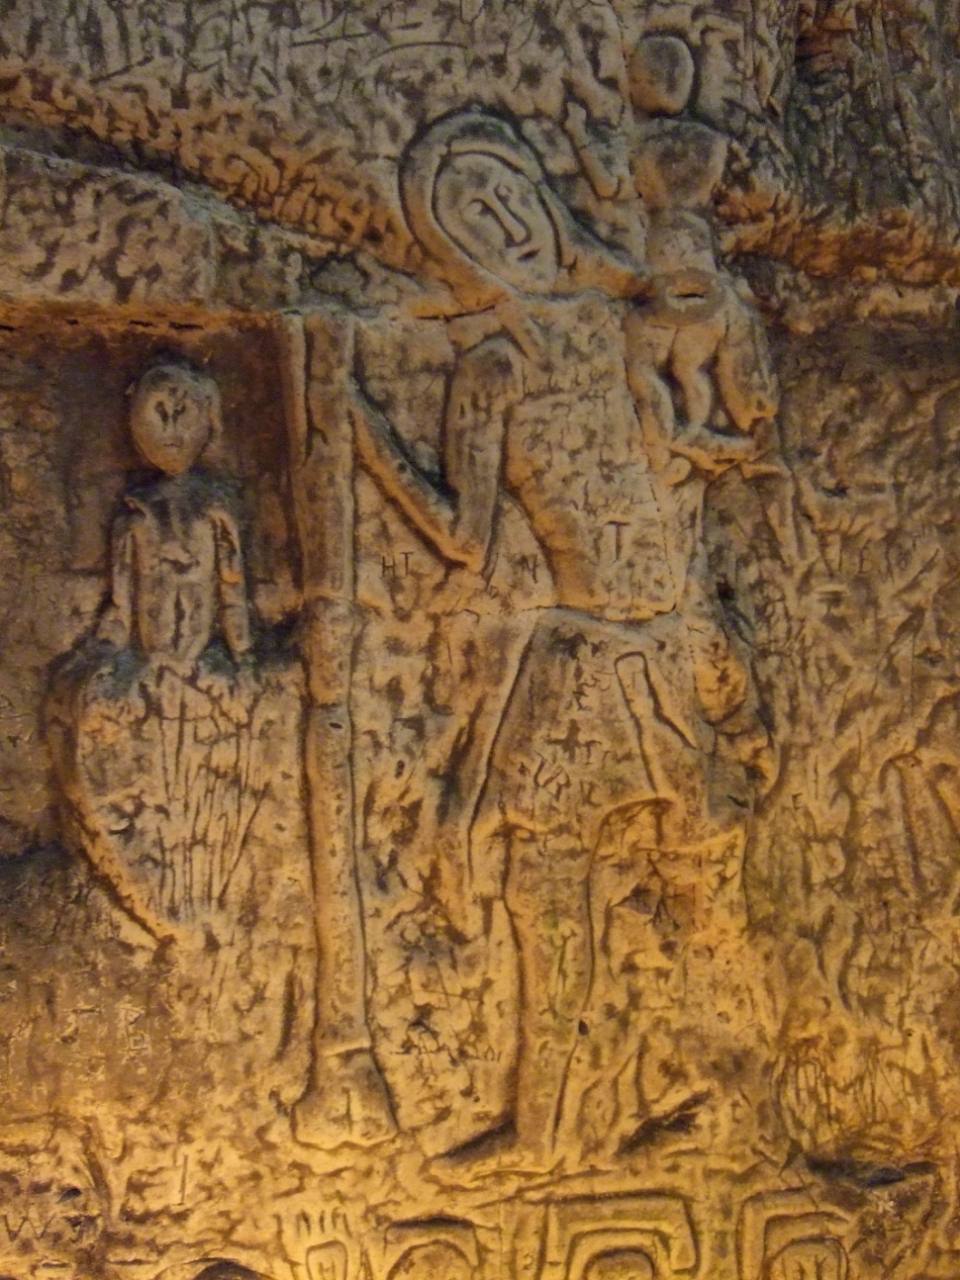 Mysterious symbols and carvings in man-made Royston Cave 4